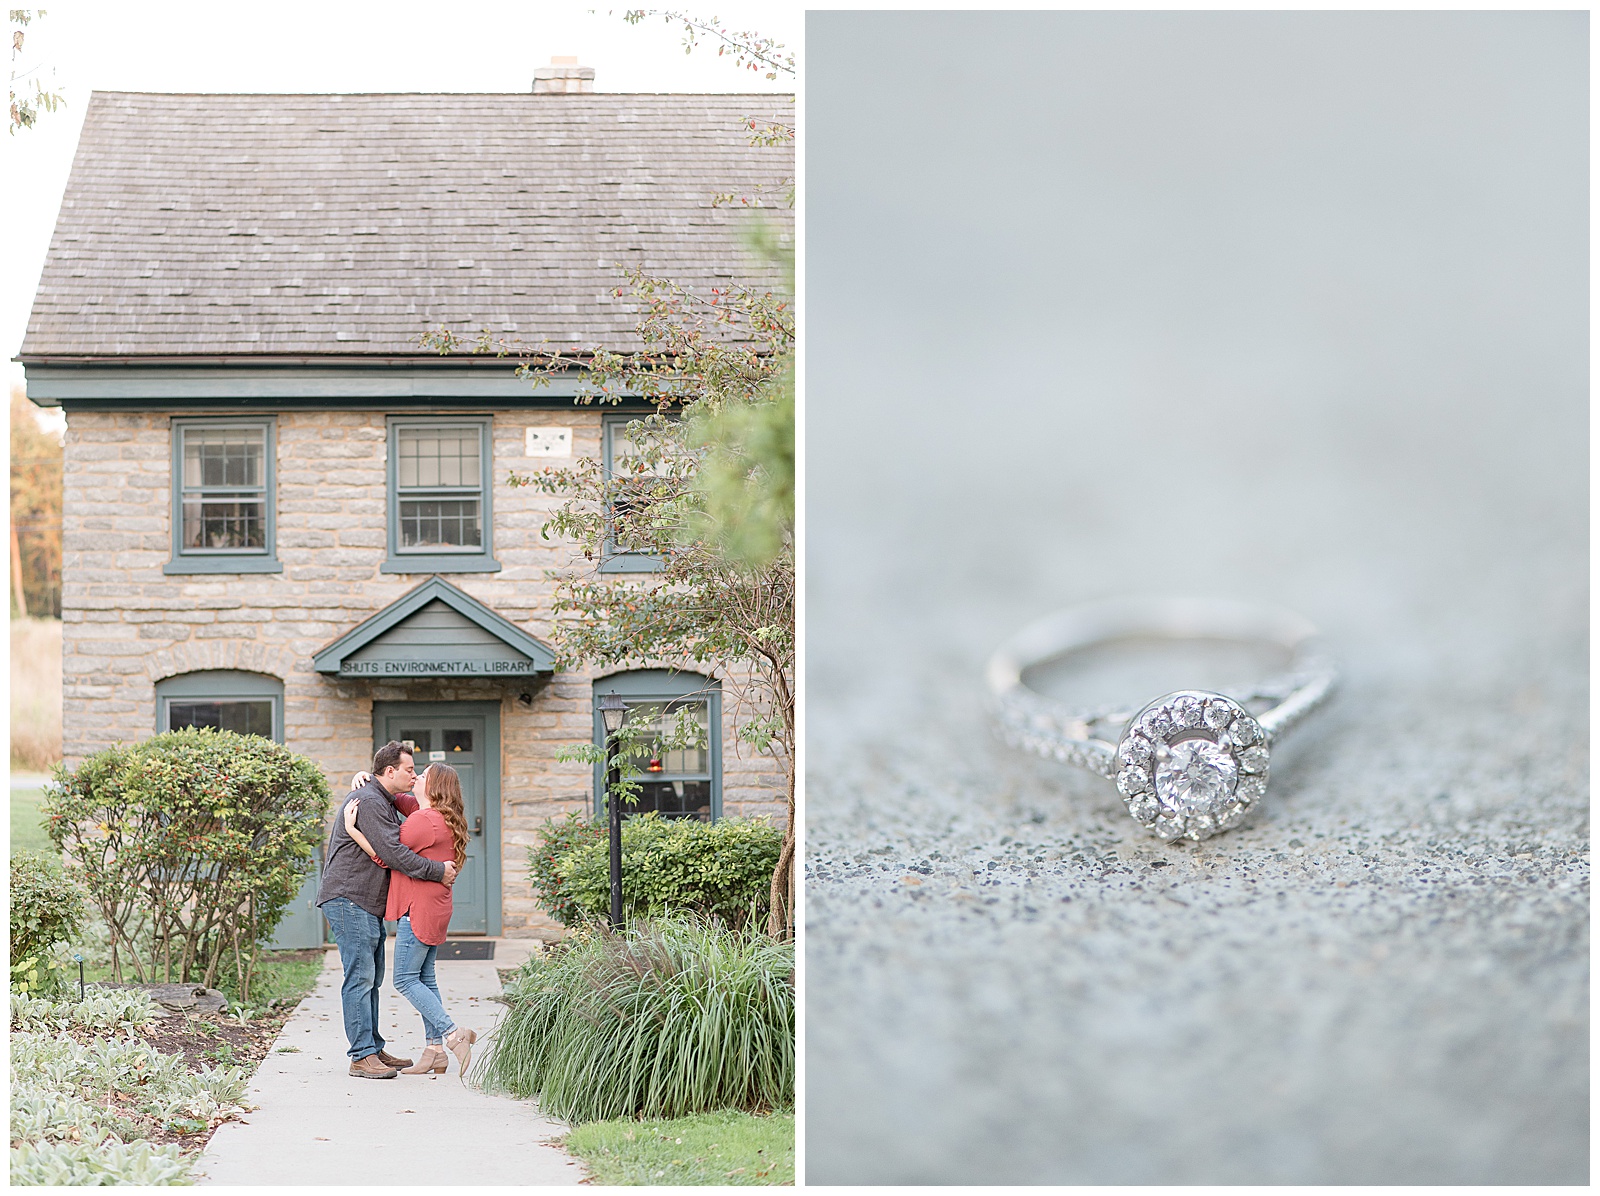 Engagement Session Photos at Lancaster County Park in front of old stone building kissing